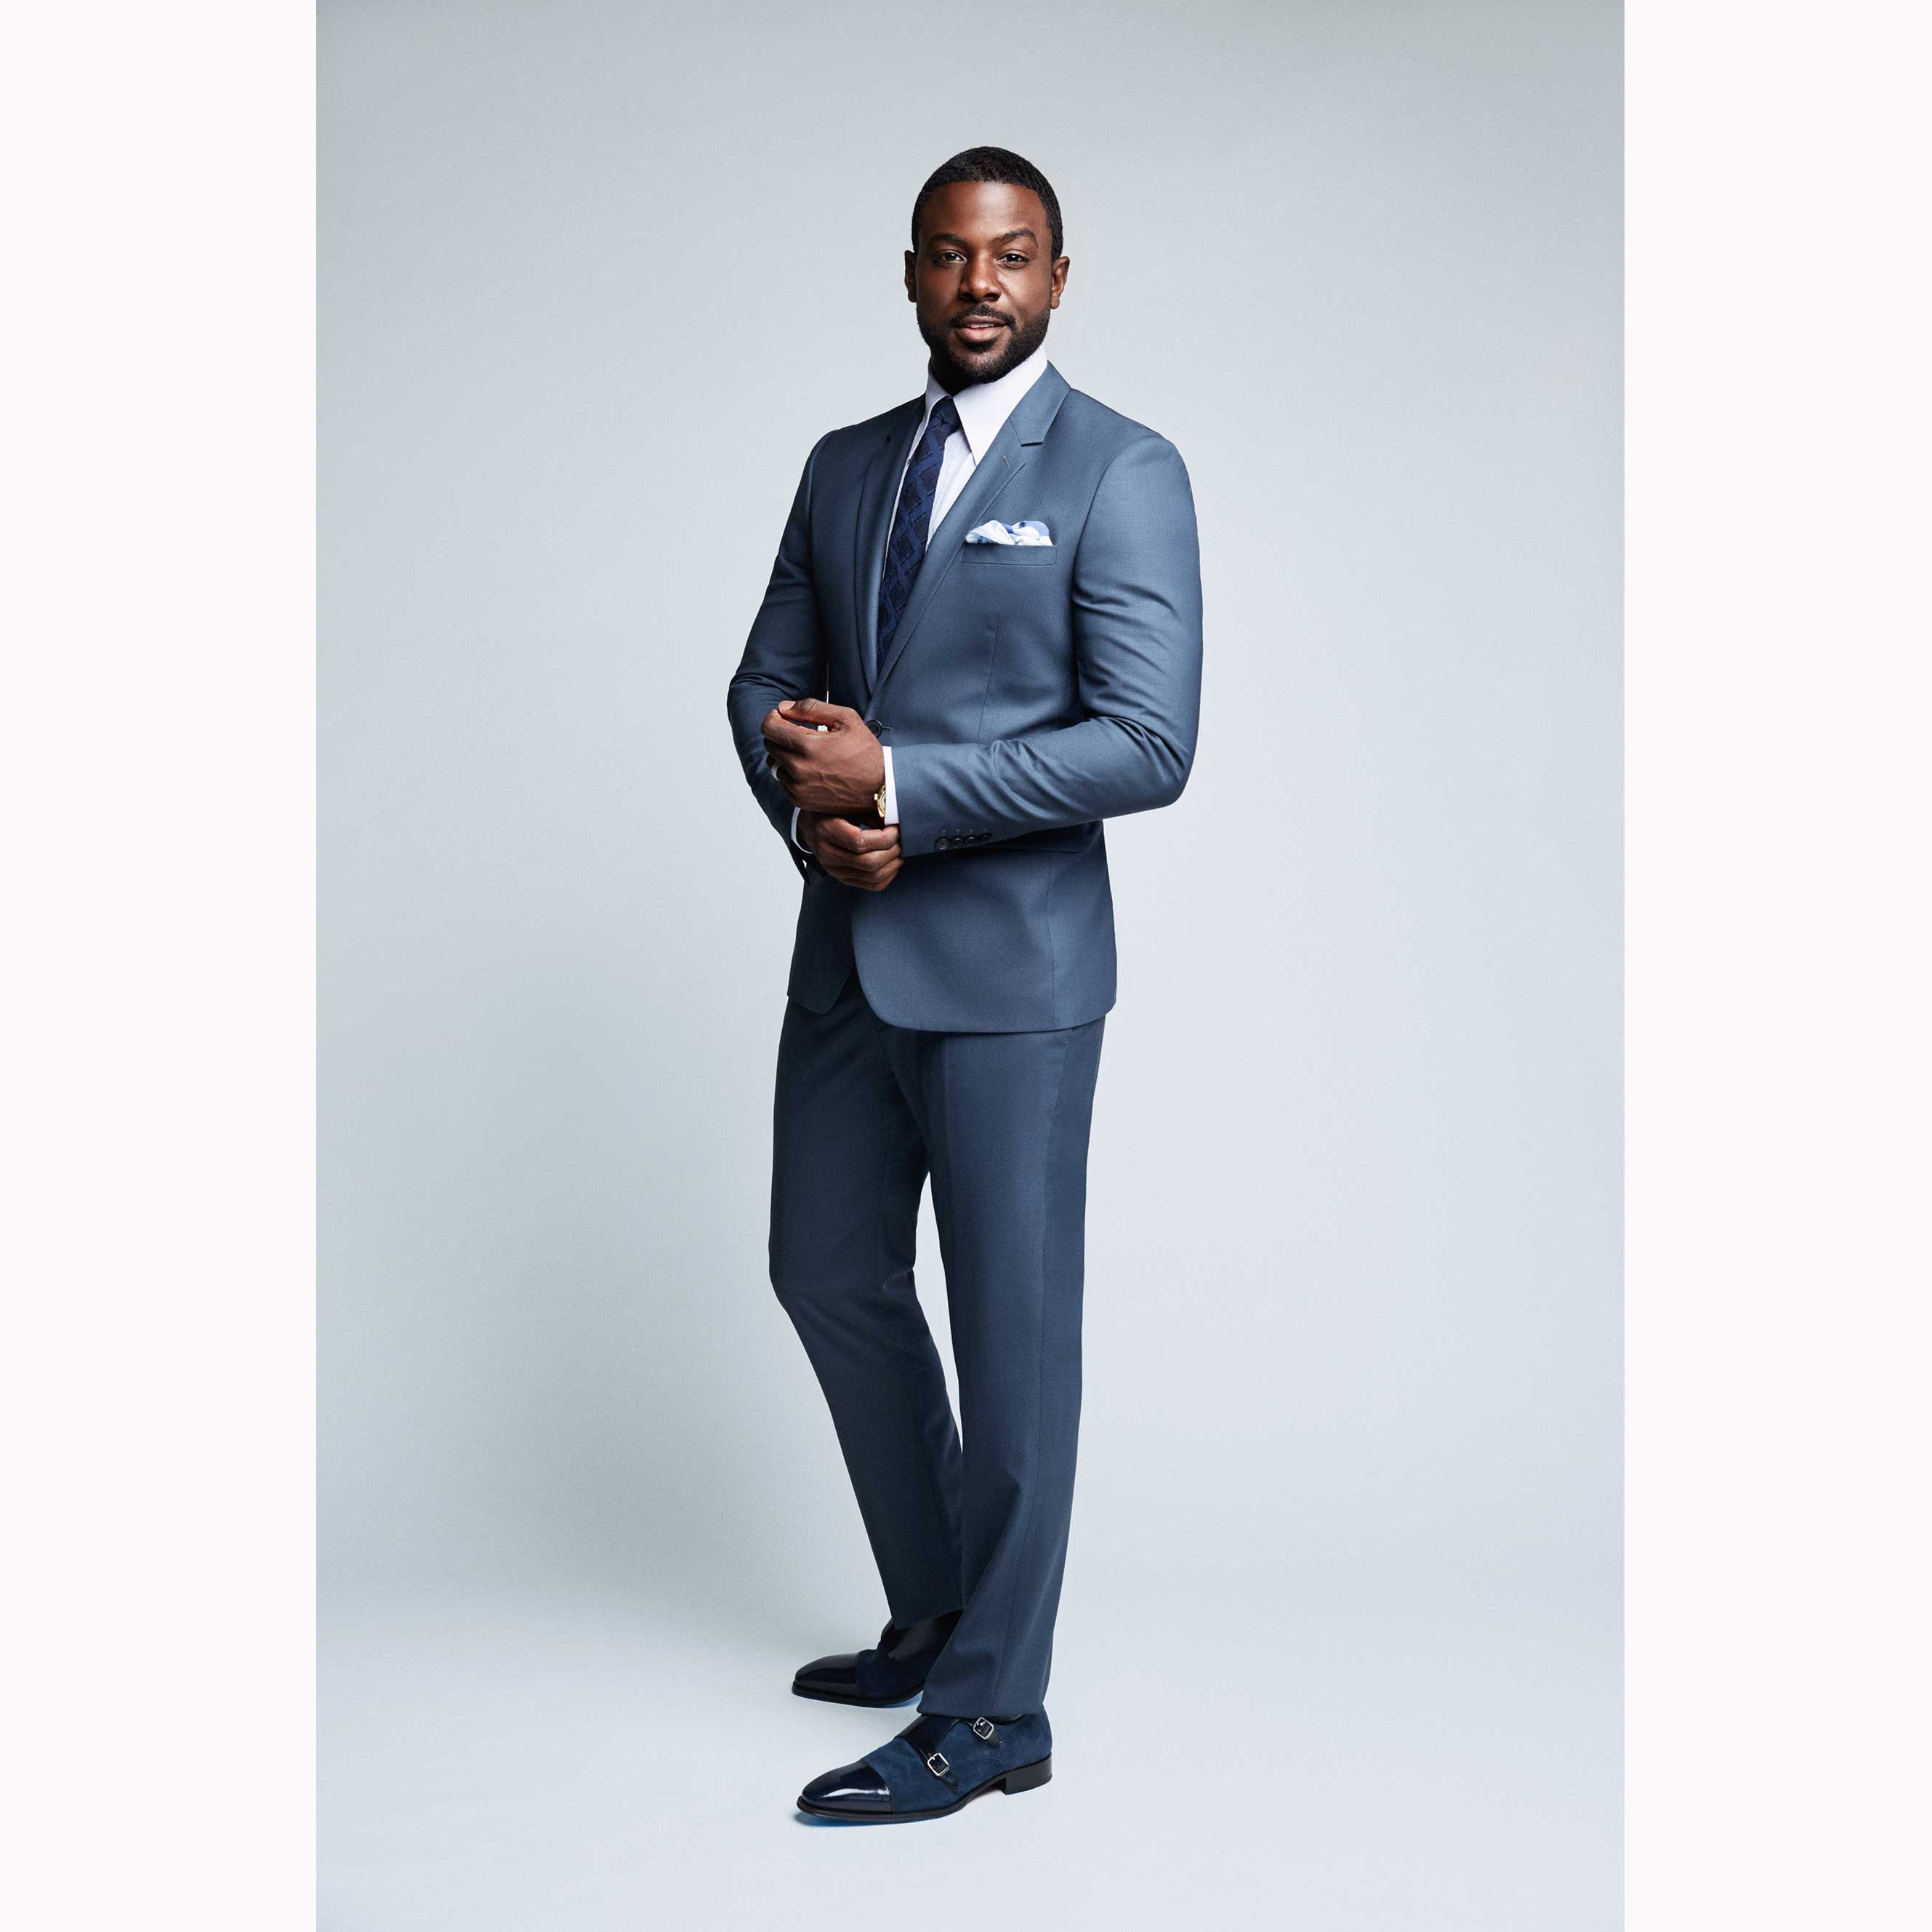 13 (New!) Photos Of Lance Gross Looking His Absolute Sexiest
